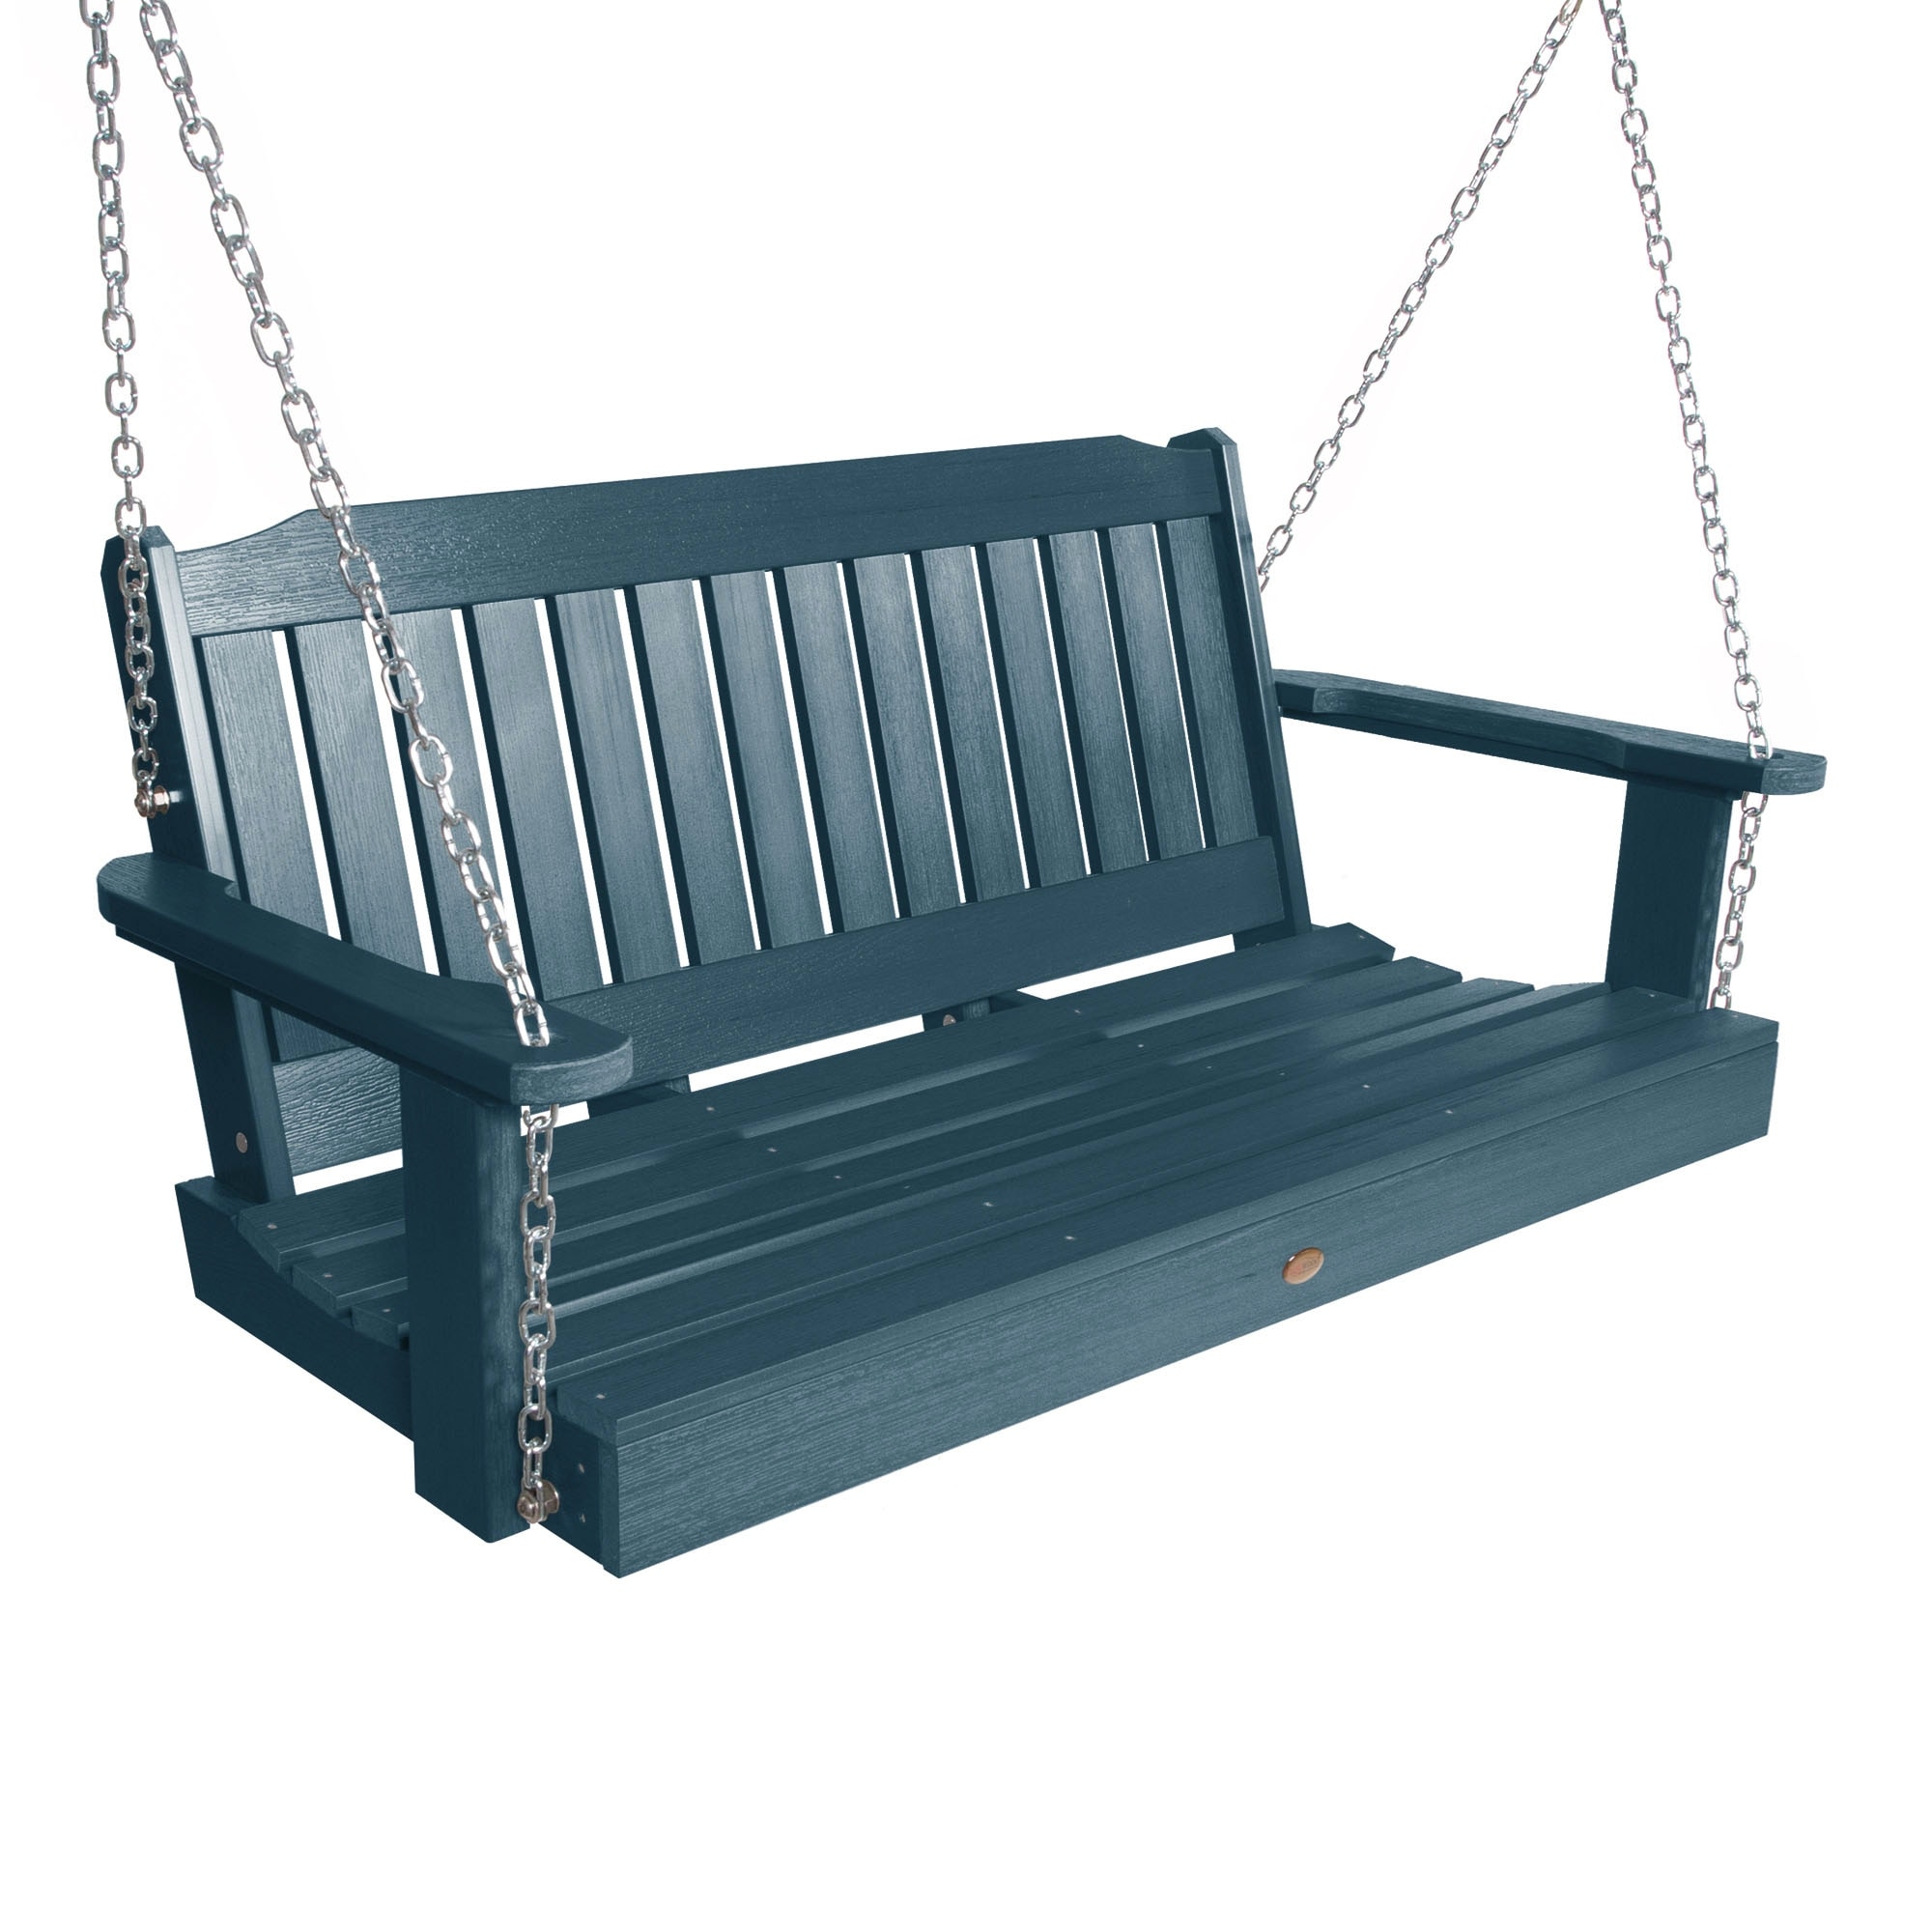 highwood Highwood Lehigh 4-foot Eco-friendly Synthetic Wood Porch Swing